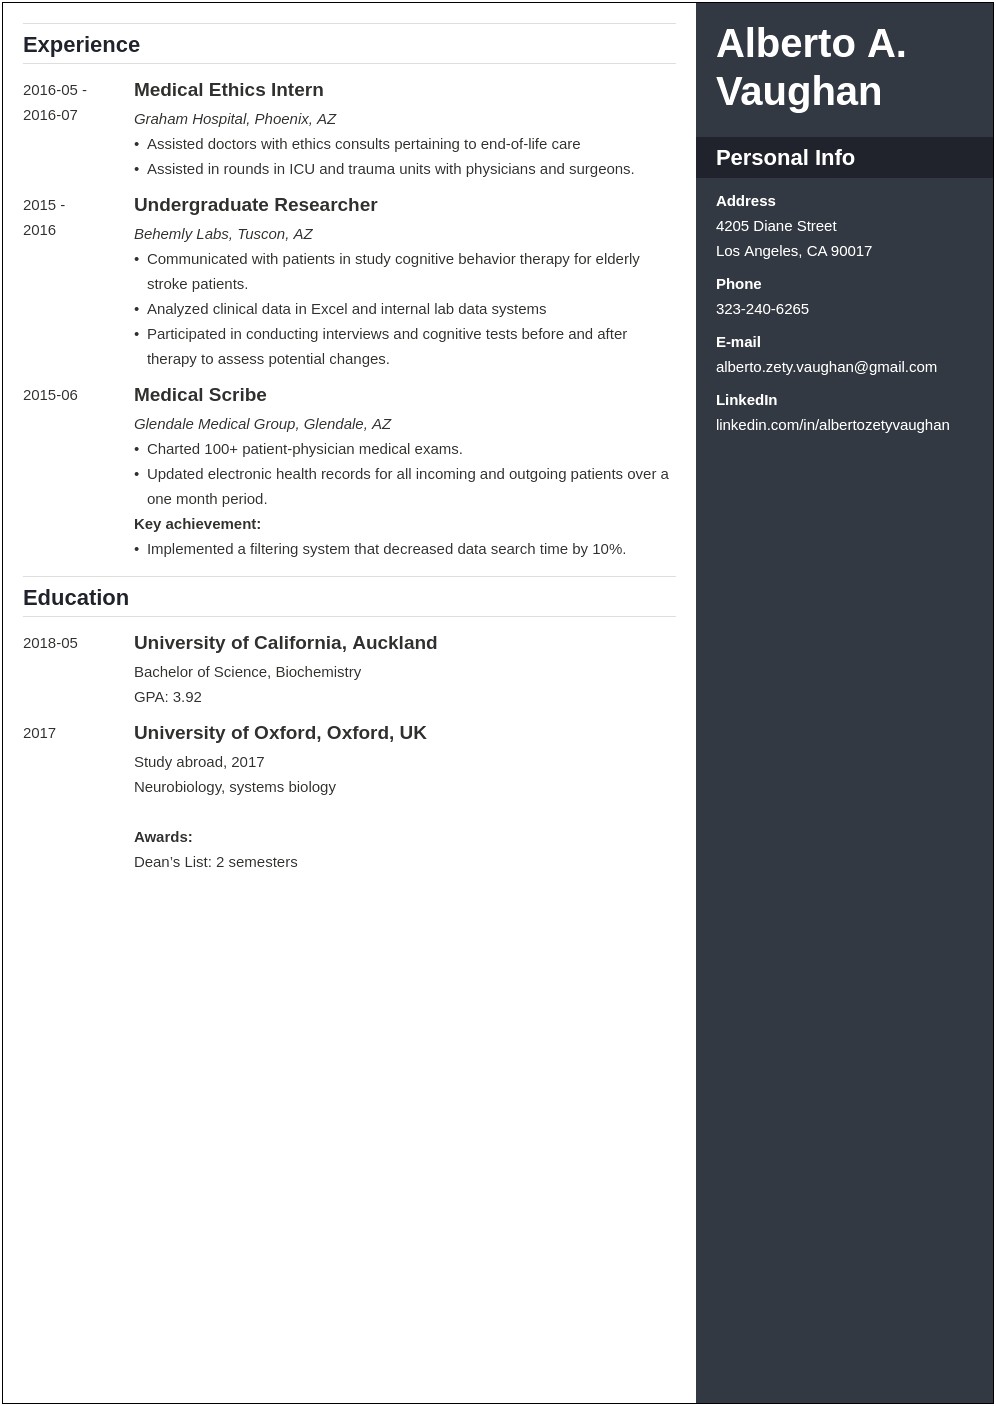 Resume Format For Students Applying For Medical School